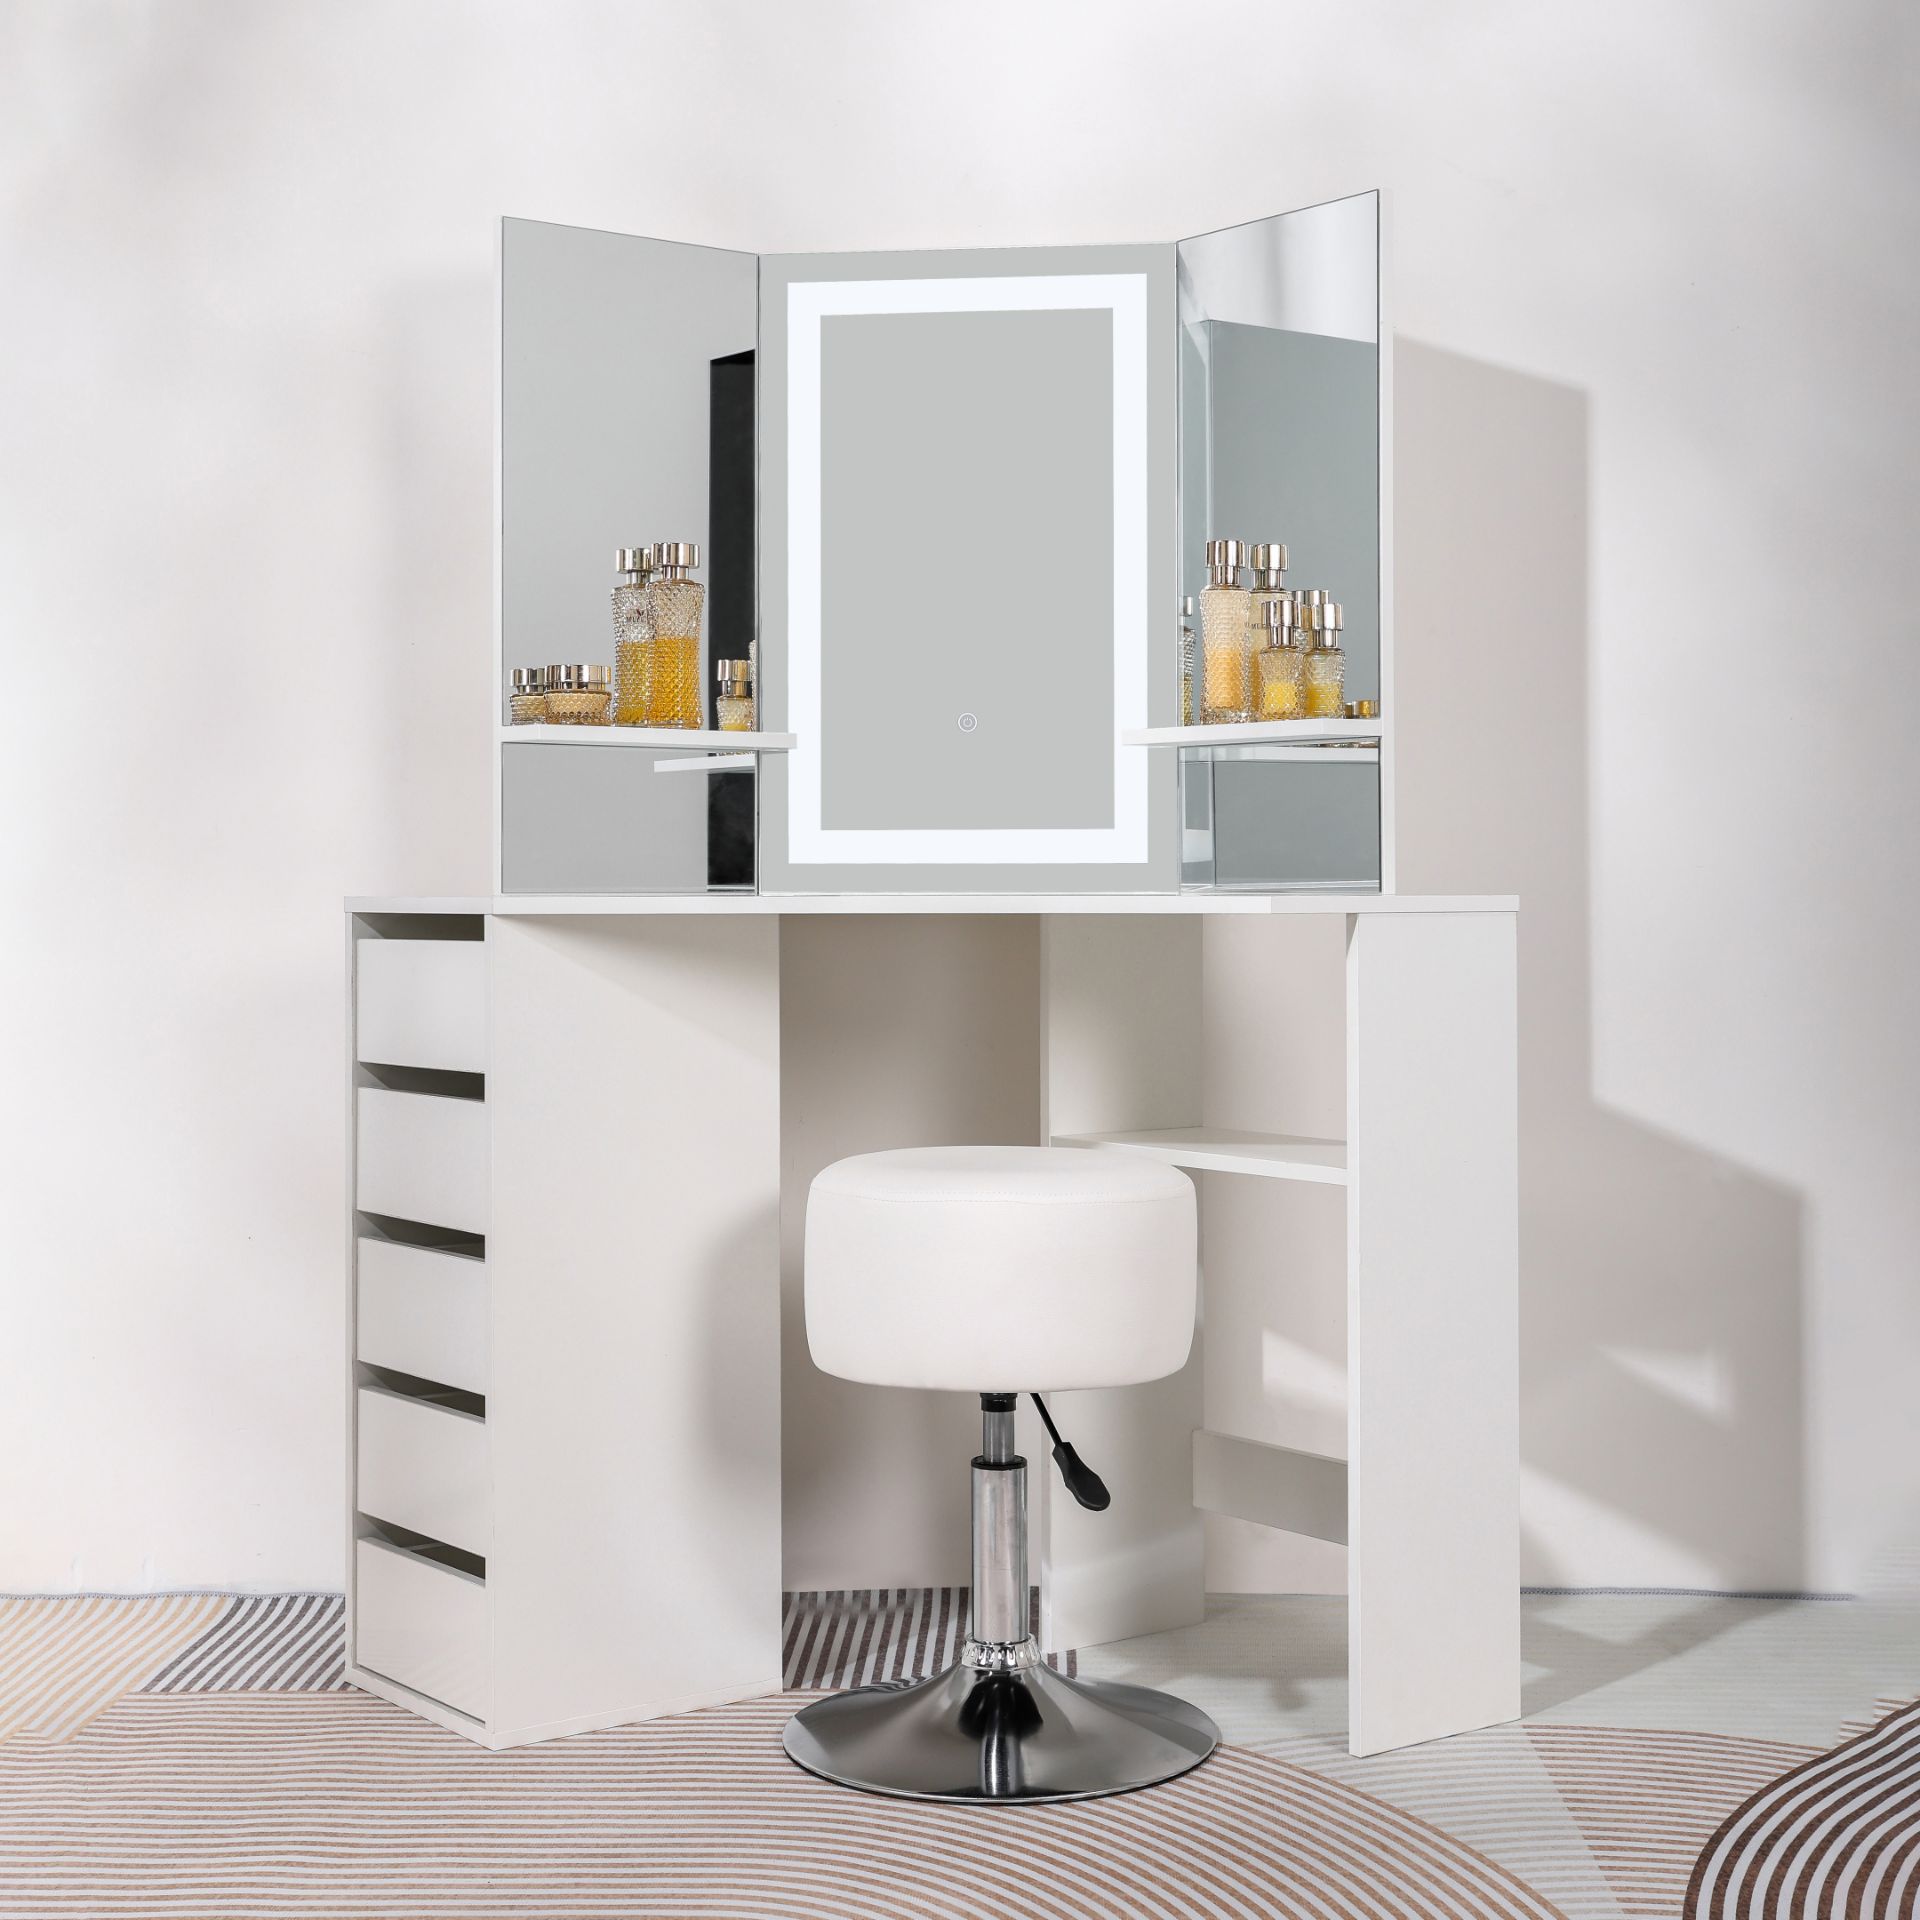 BRAND NEW MAKE UP CORNER DRESSING TABLE 5 DRAWER WITH TOUCH LED MIRROR & STOOL RRP £350 - Image 3 of 4